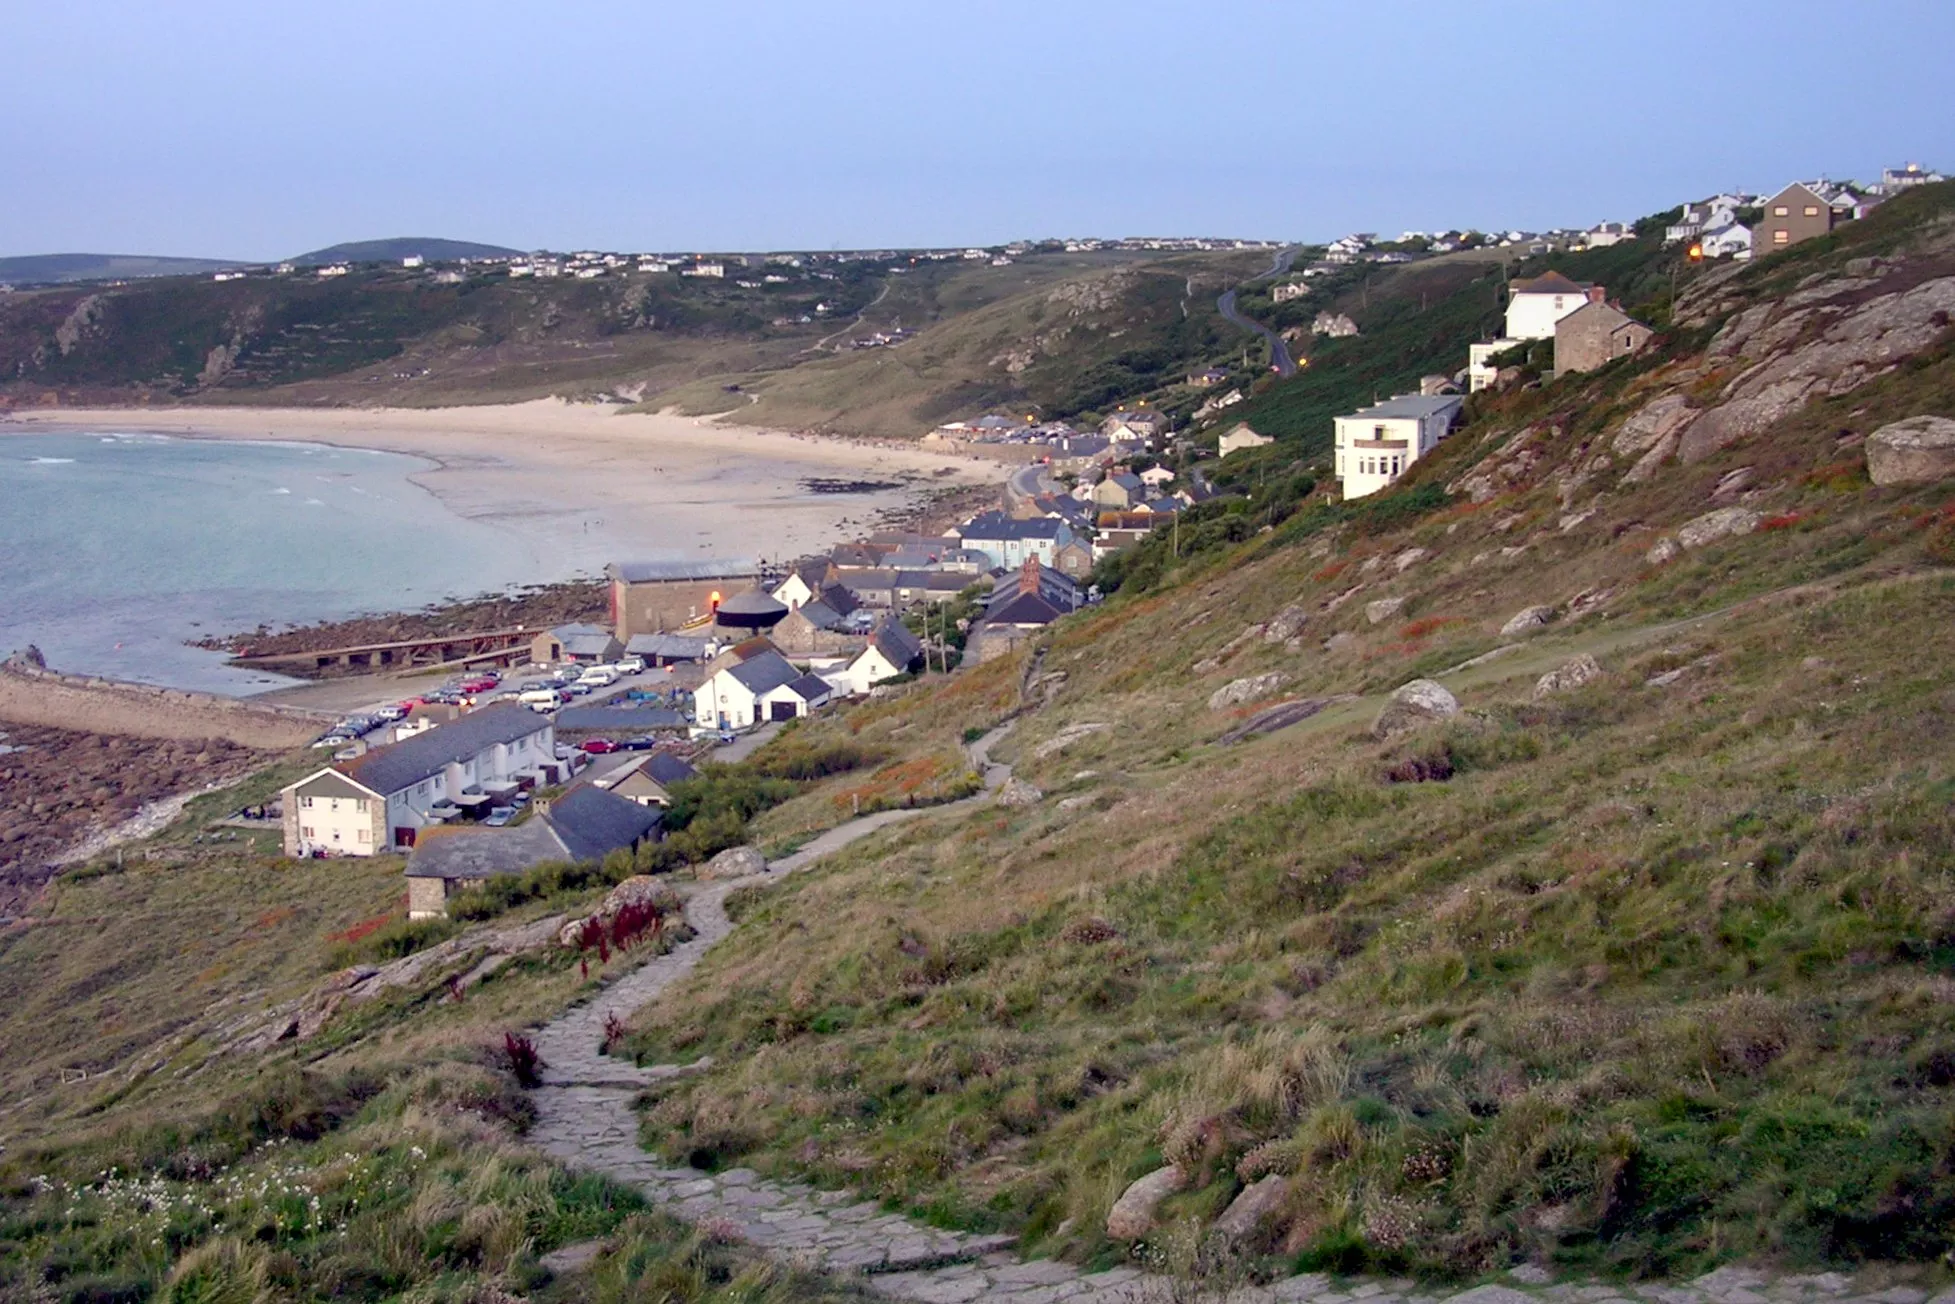 Land’s End to Sennen Cove in United Kingdom, Europe | Trekking & Hiking - Rated 0.8